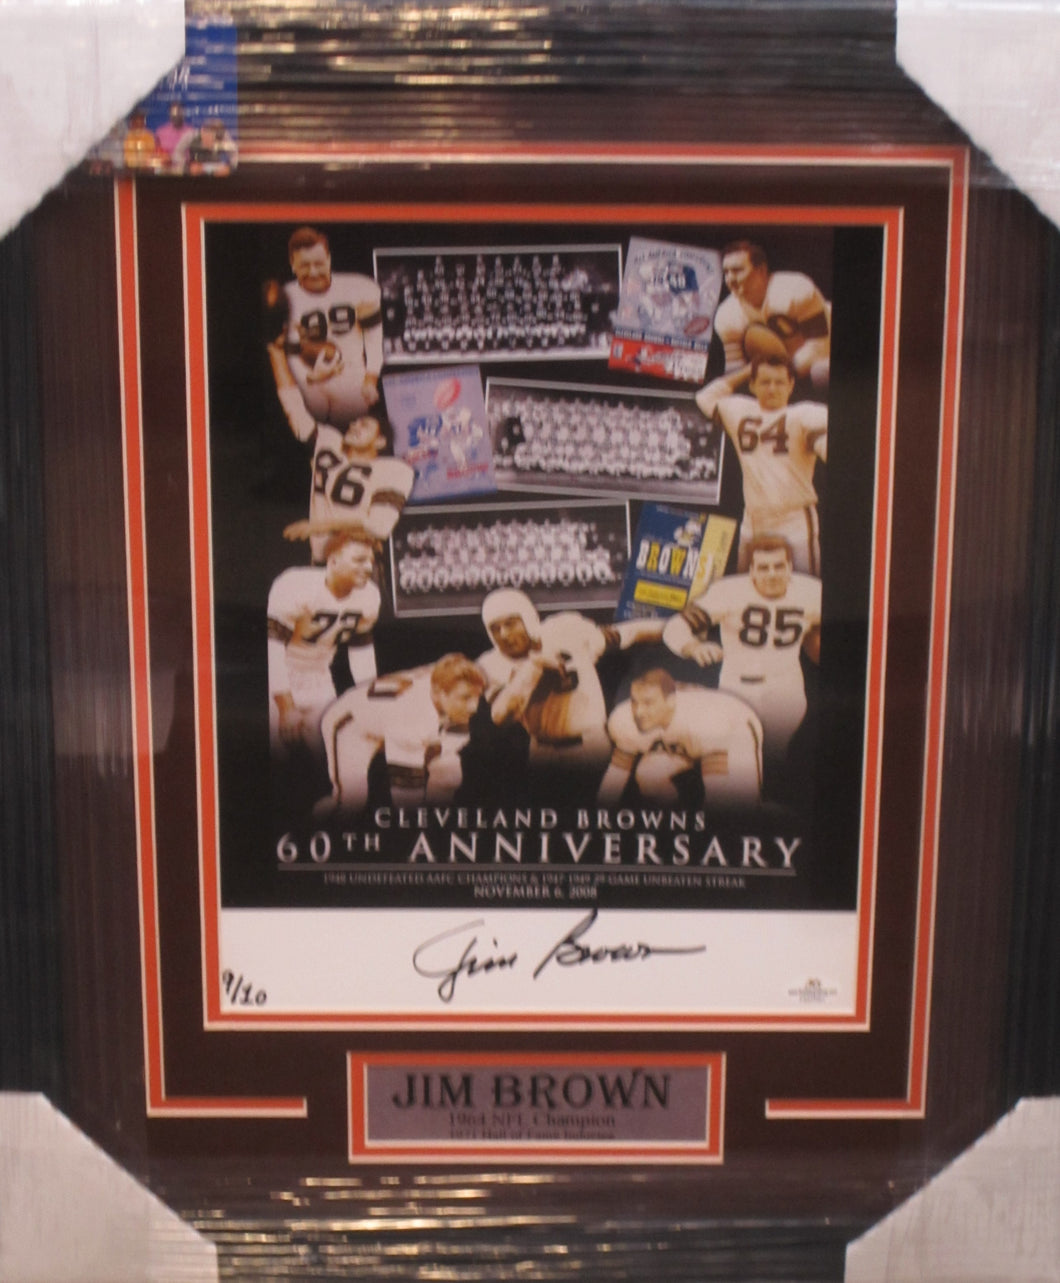 Cleveland Browns Jim Brown Signed 11x14 Cleveland Browns 60th Anniversary Collage Poster Framed & Matted with COA